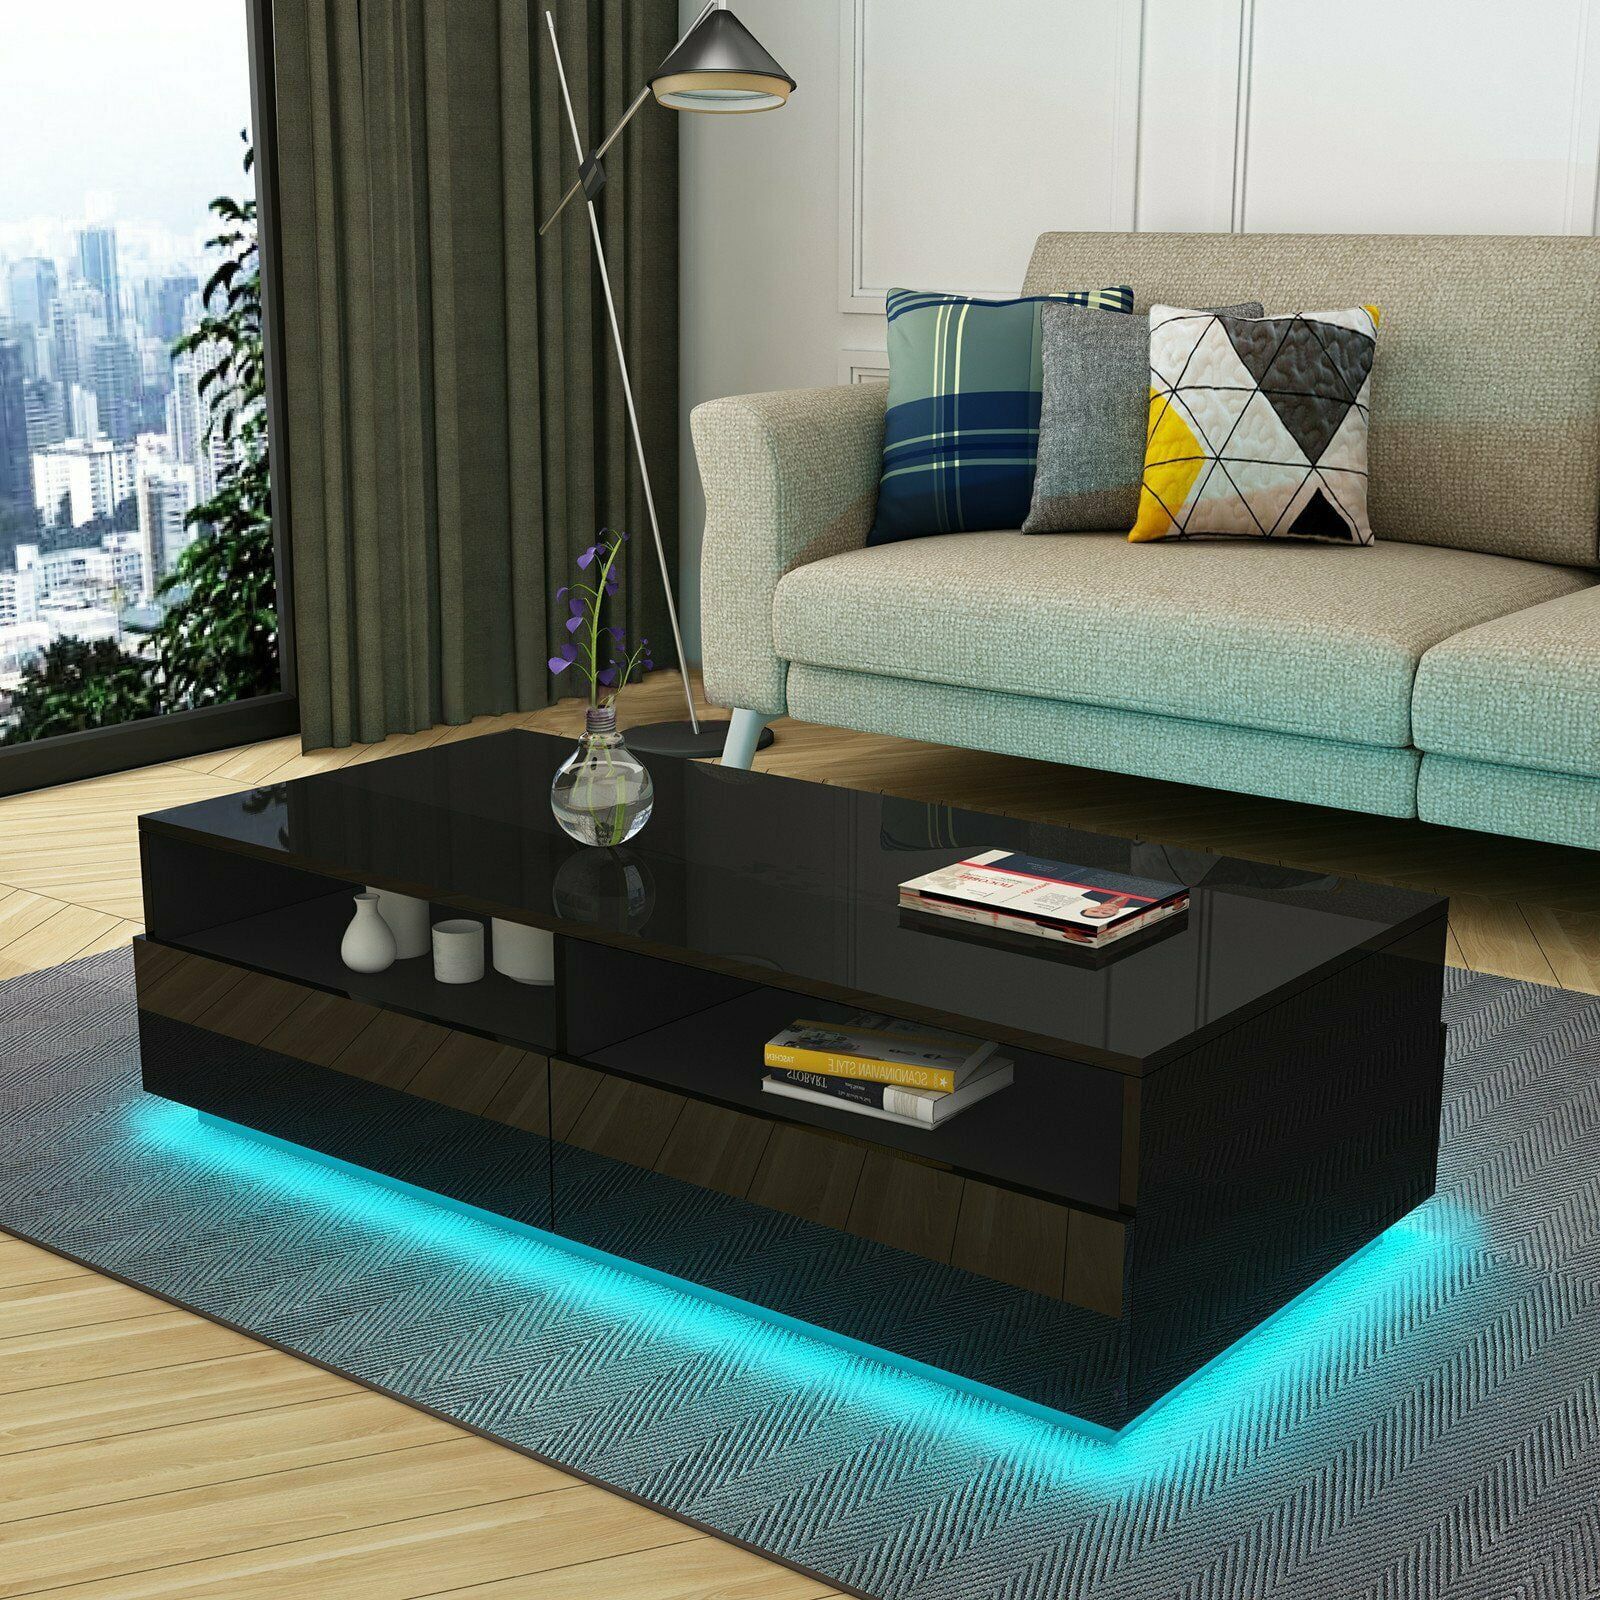 Led Rectangular Coffee Table Tea Modern Living Room Furniture Black Throughout Coffee Tables With Led Lights (Gallery 10 of 20)